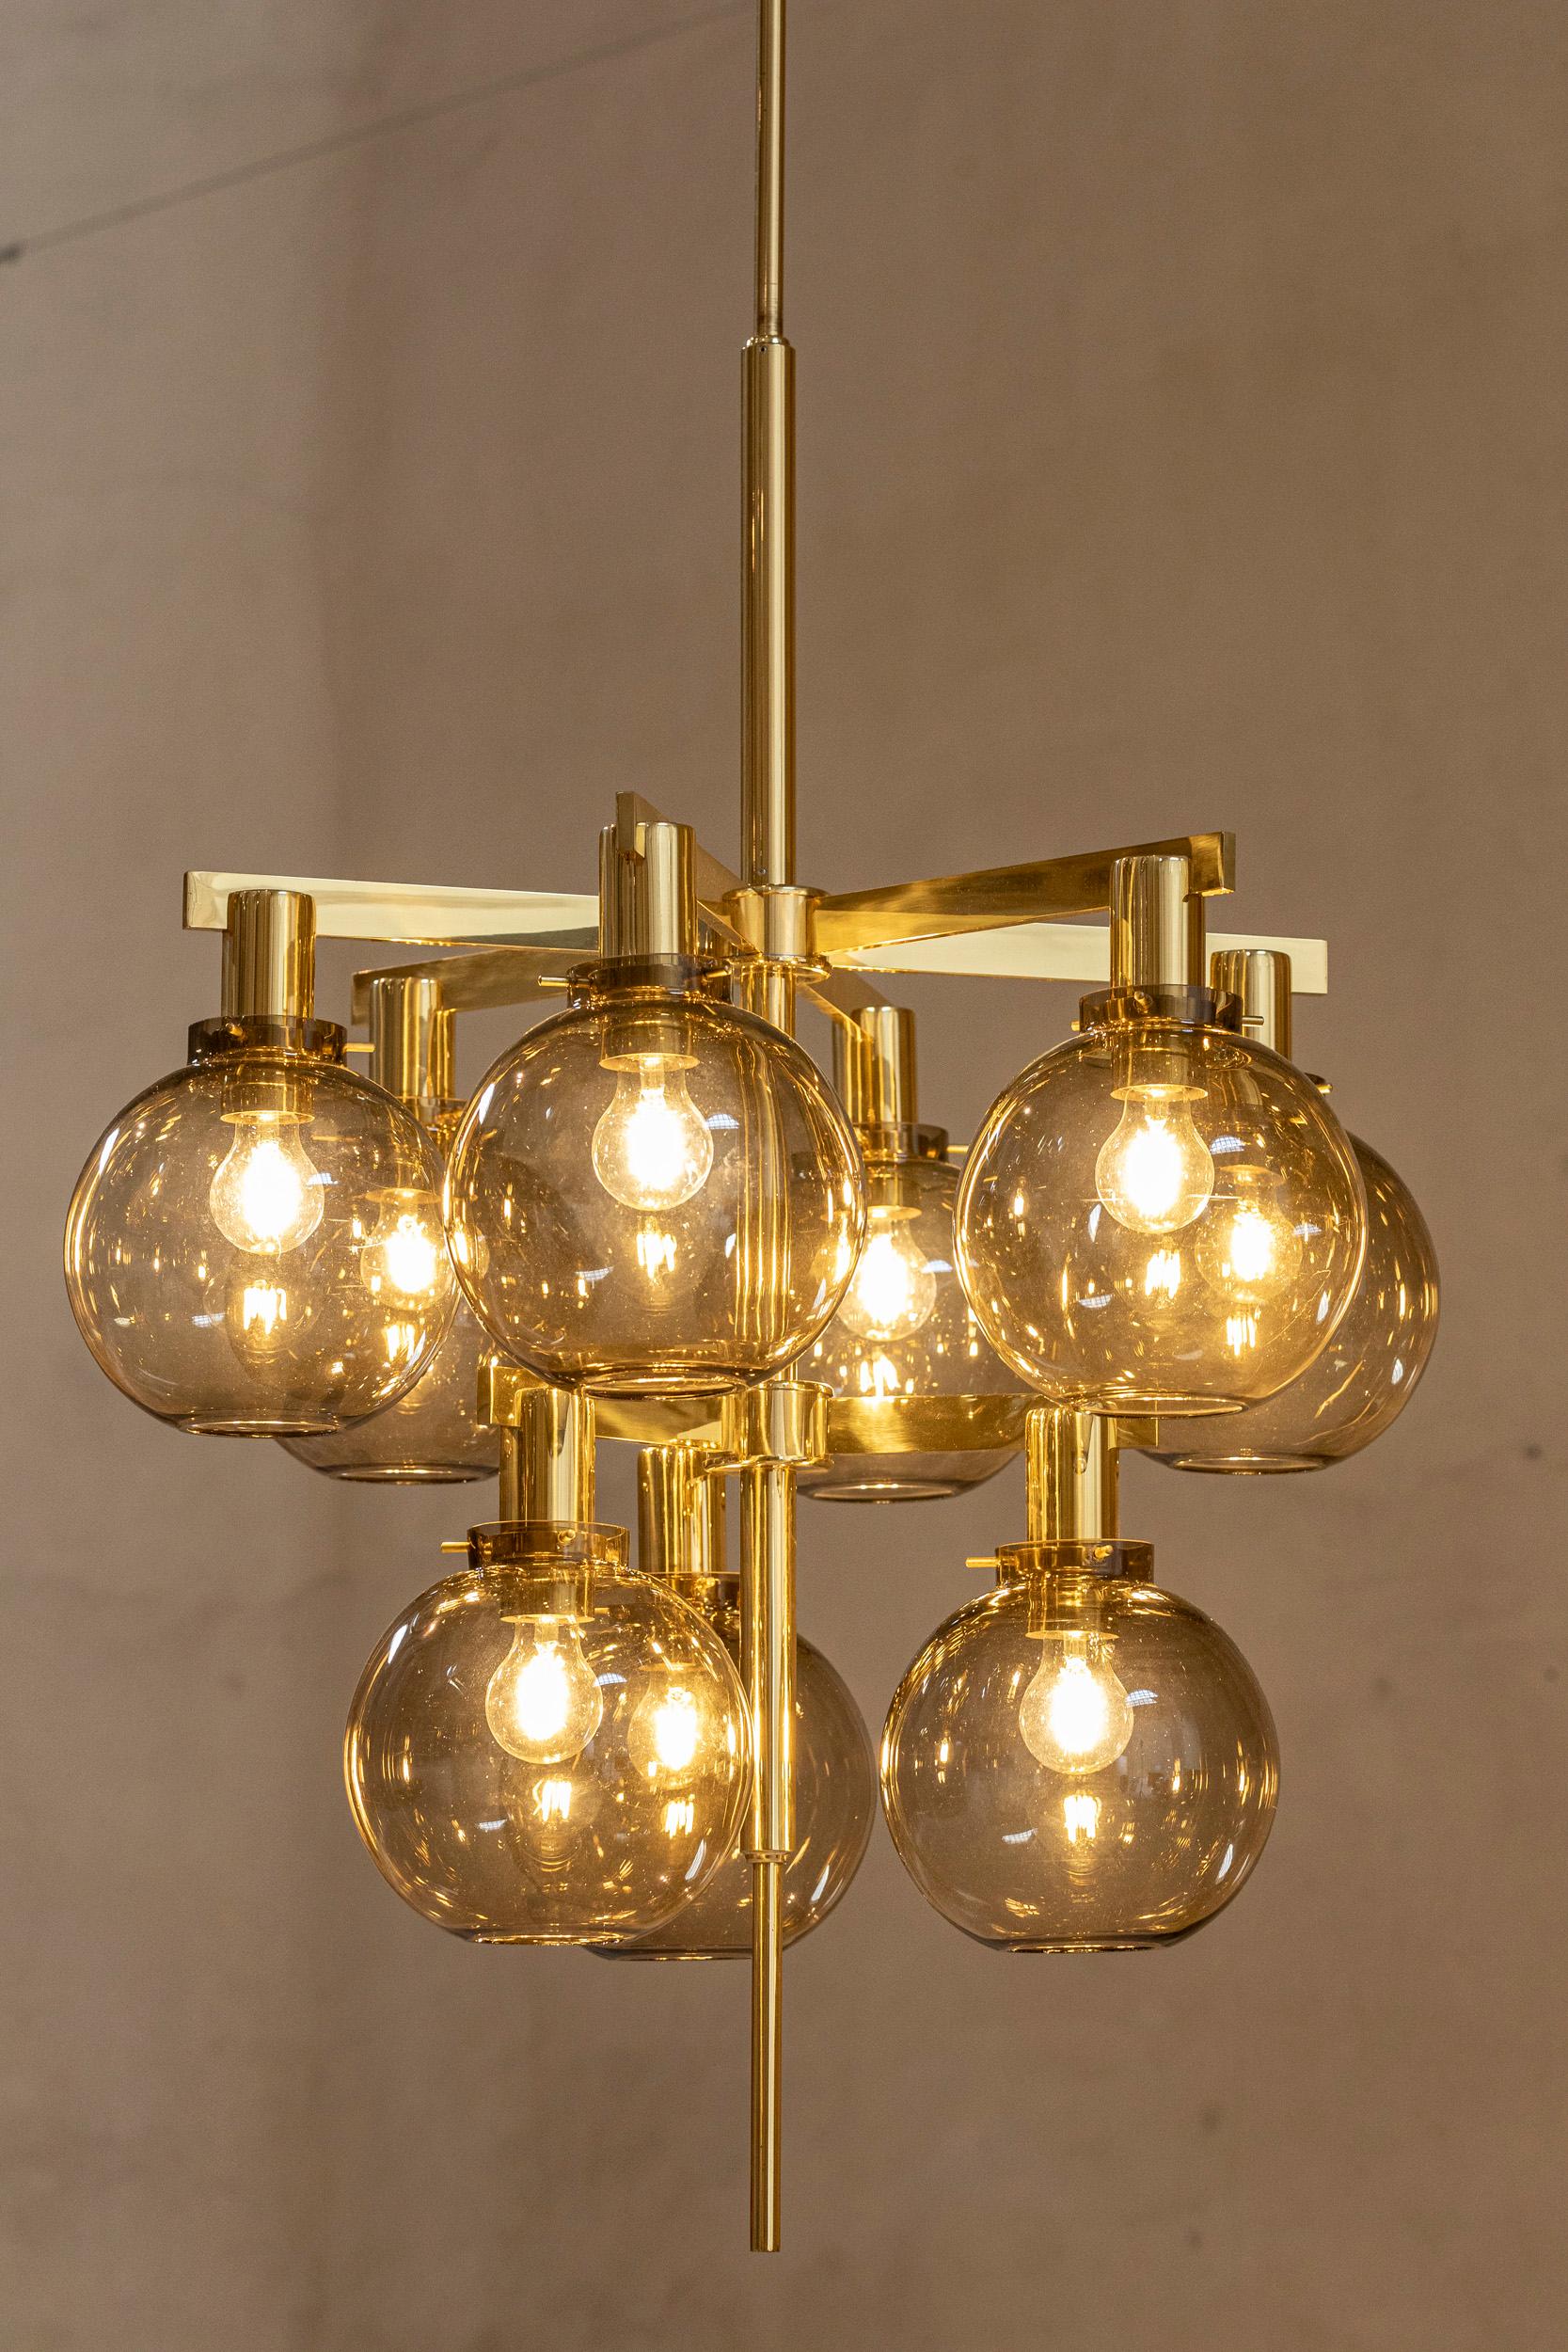 Pair of midcentury chandeliers by Hans-Agne Jakobsson For Sale 6